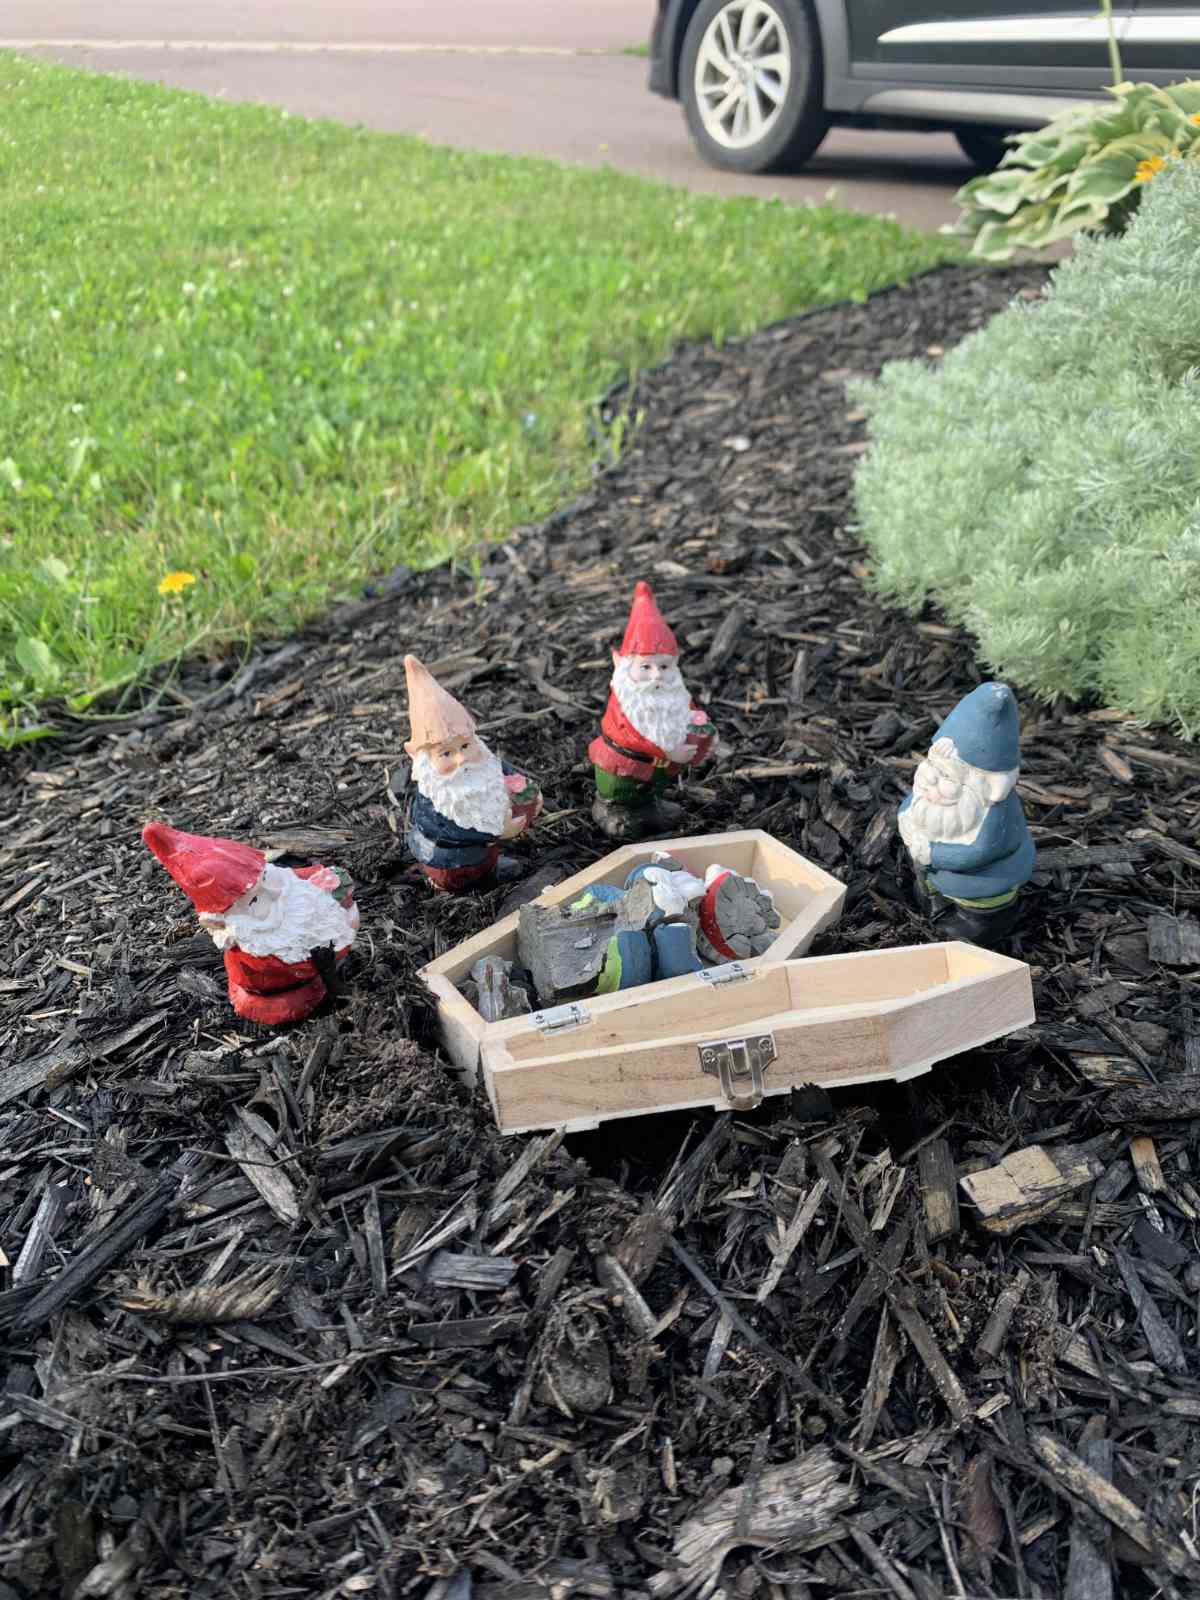 One of my garden gnomes sadly passed away this year. So with the help of my crafty neighbour, we are holding a funeral service in his honour for the rest of summer